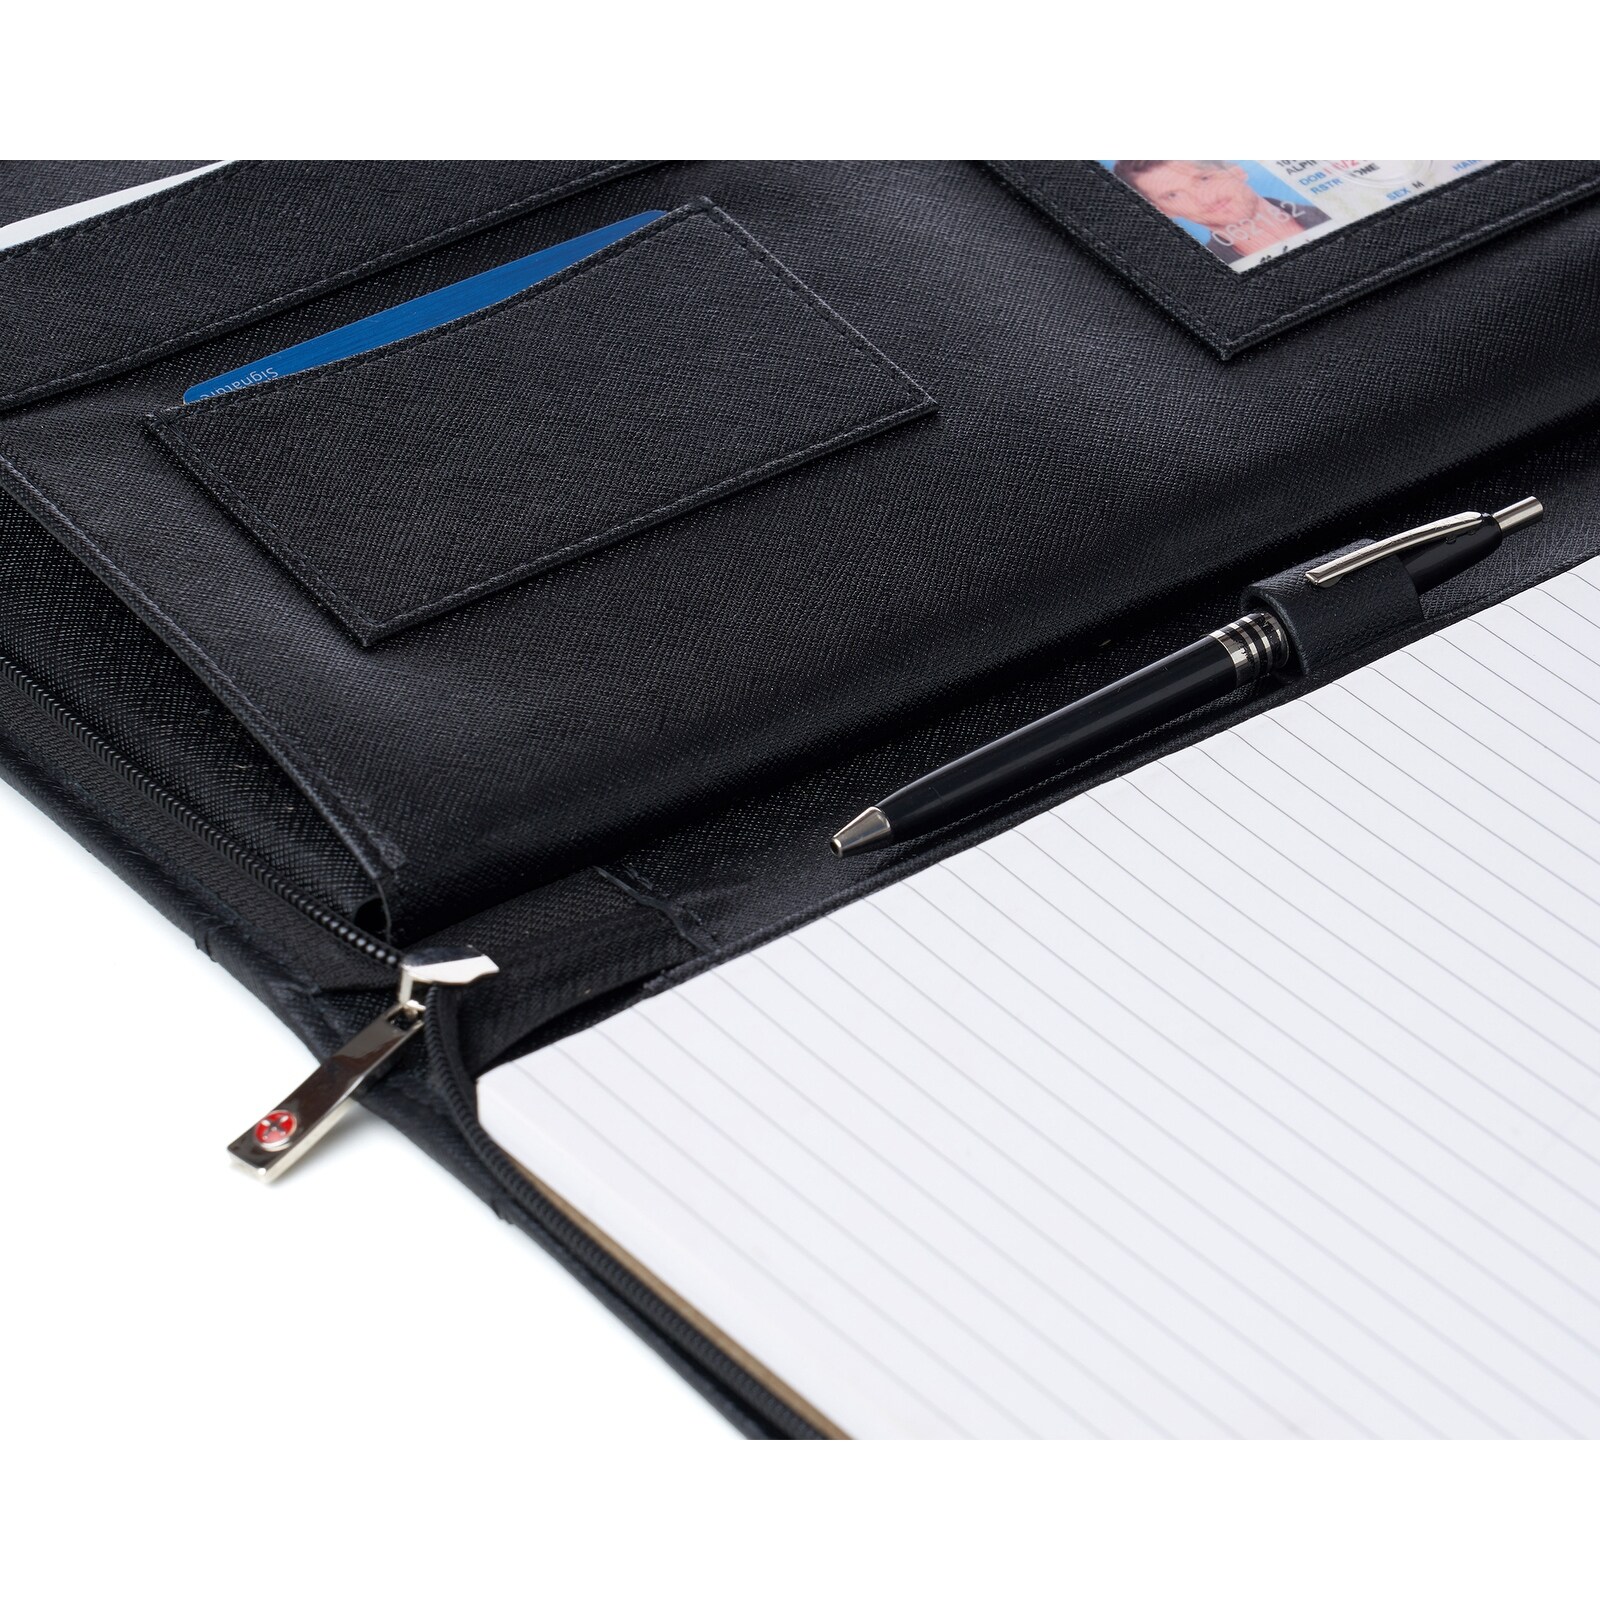 Alpine Swiss Genuine Leather Writing Pad Portfolio Business Case for Left & Right Handed Use with Tablet Sleeve Glossy Nappa Teal 